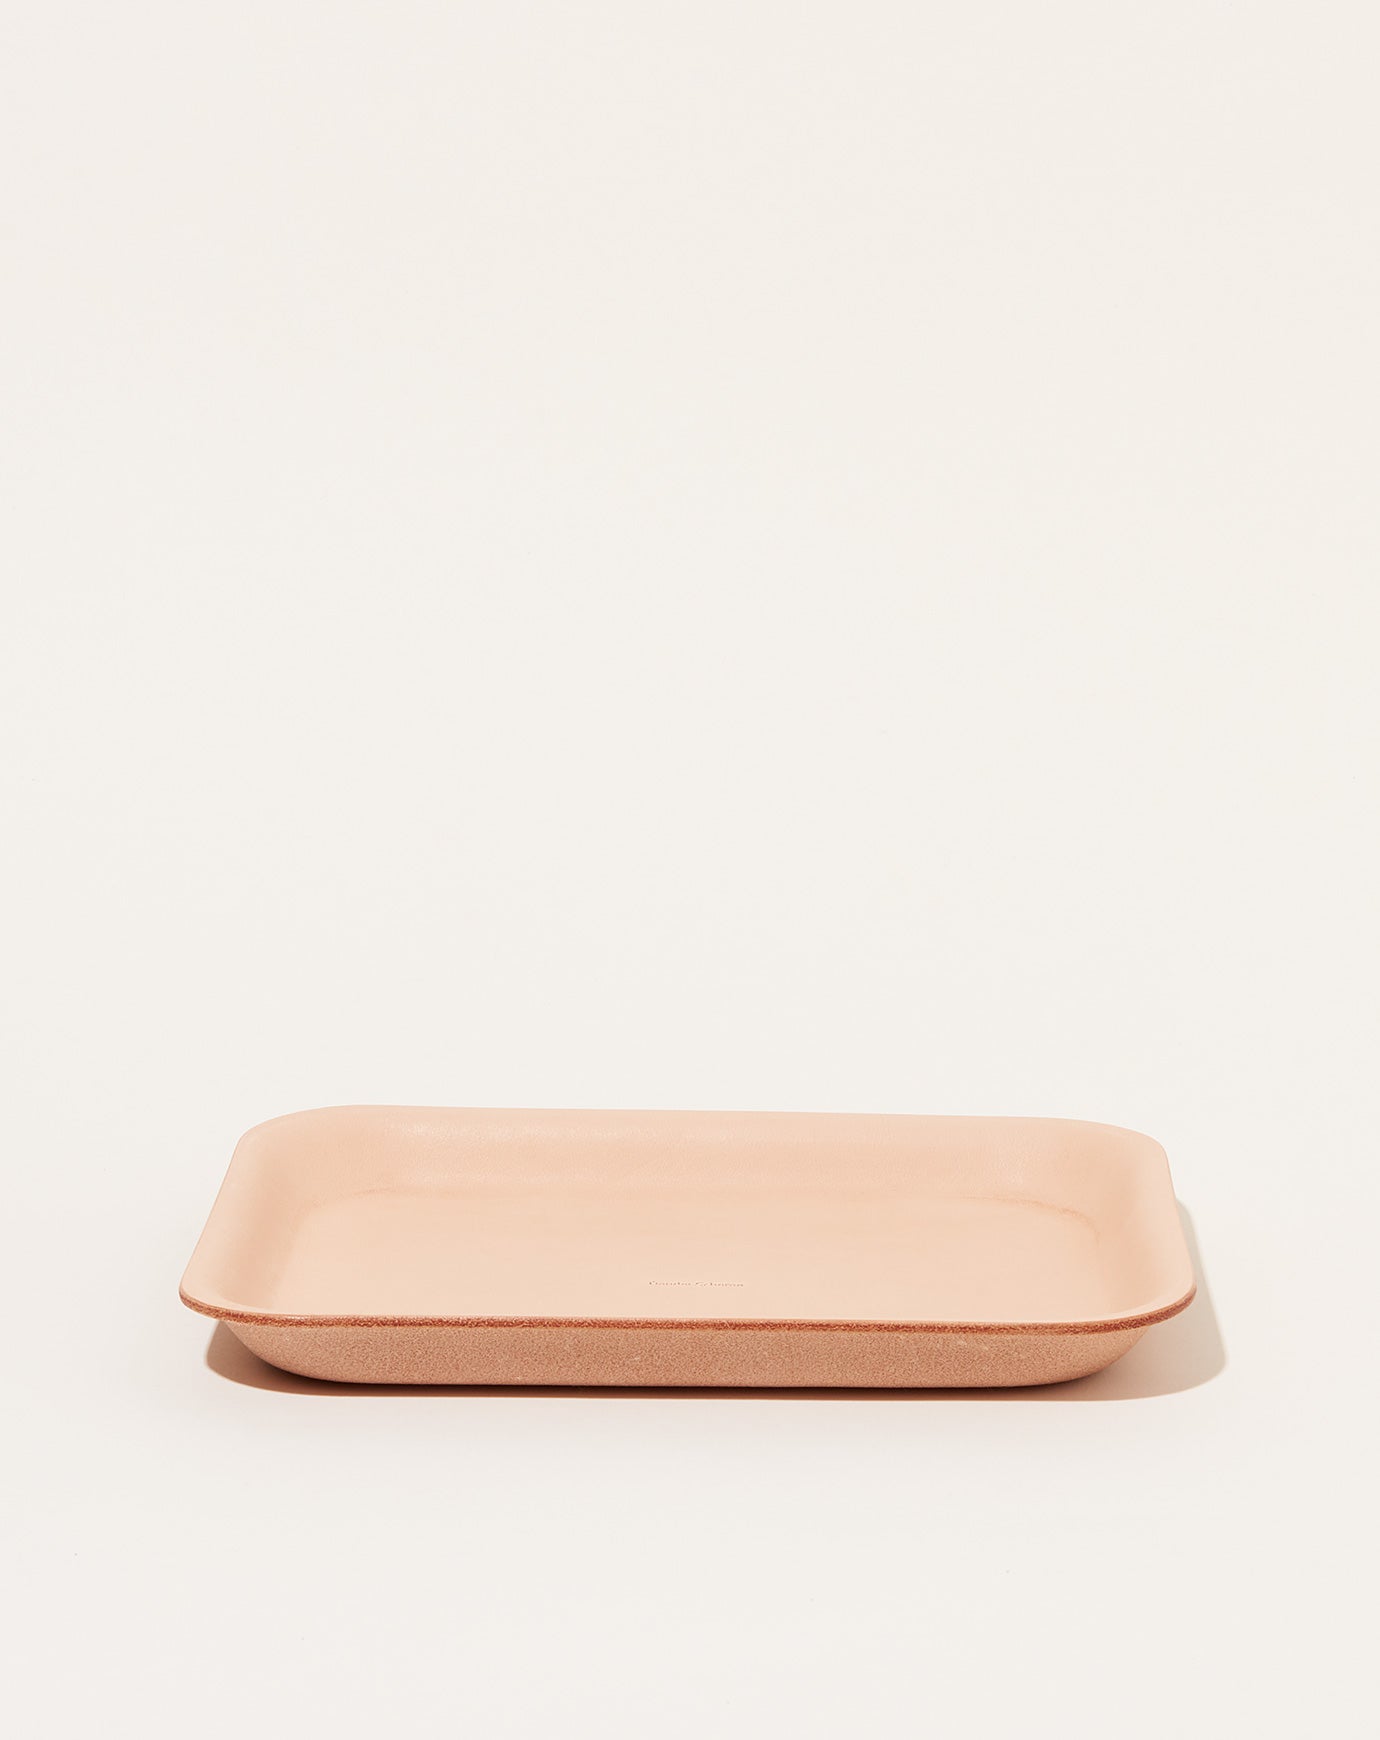 Hender Scheme Leather Tray M in Natural